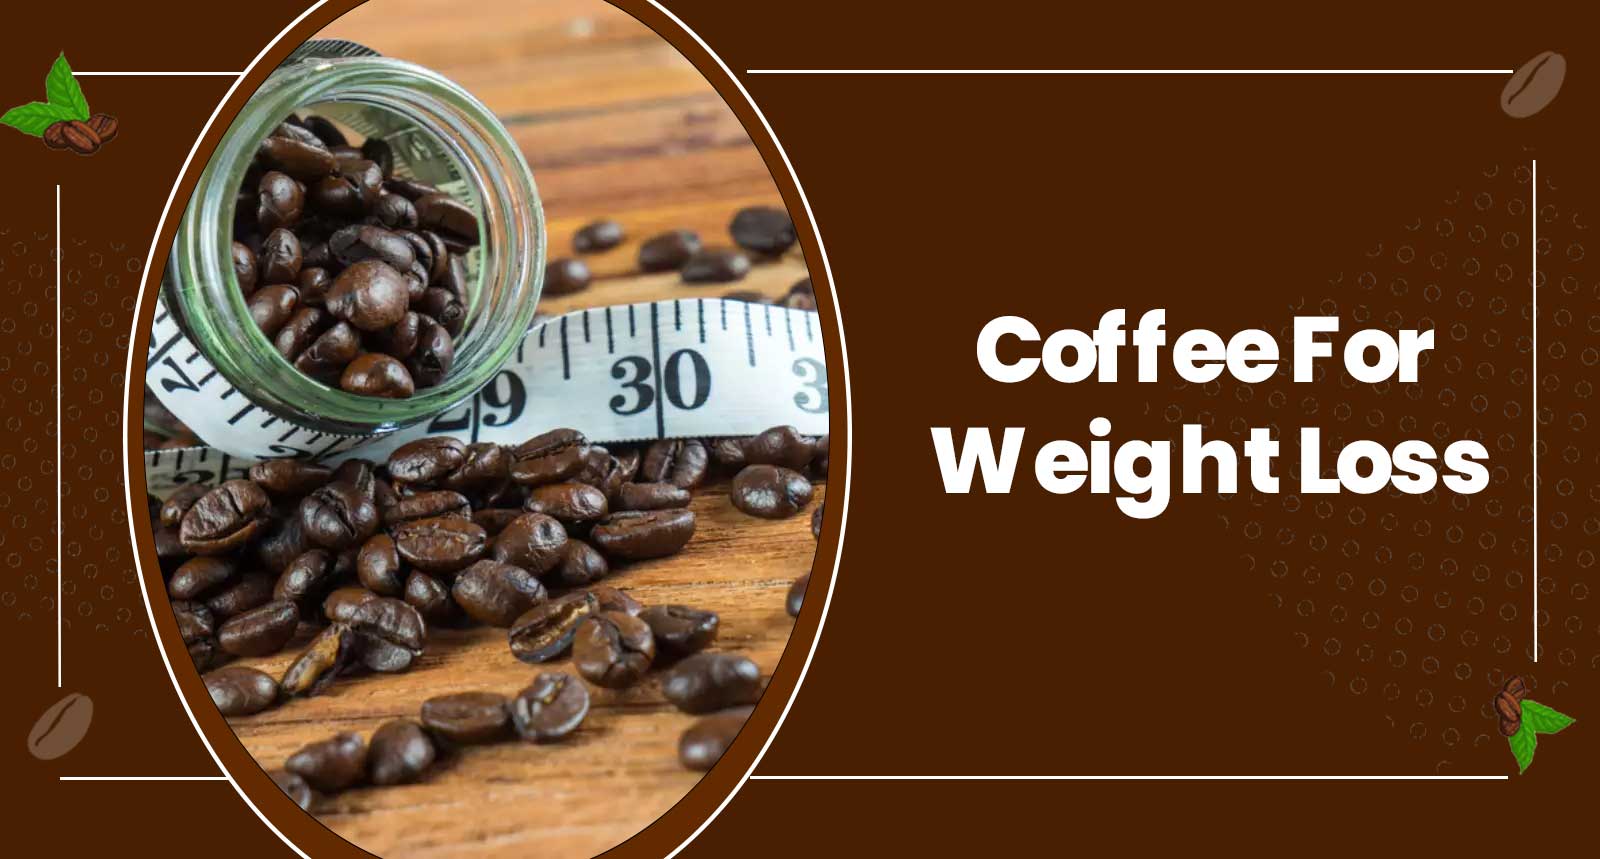 Coffee For Weight Loss